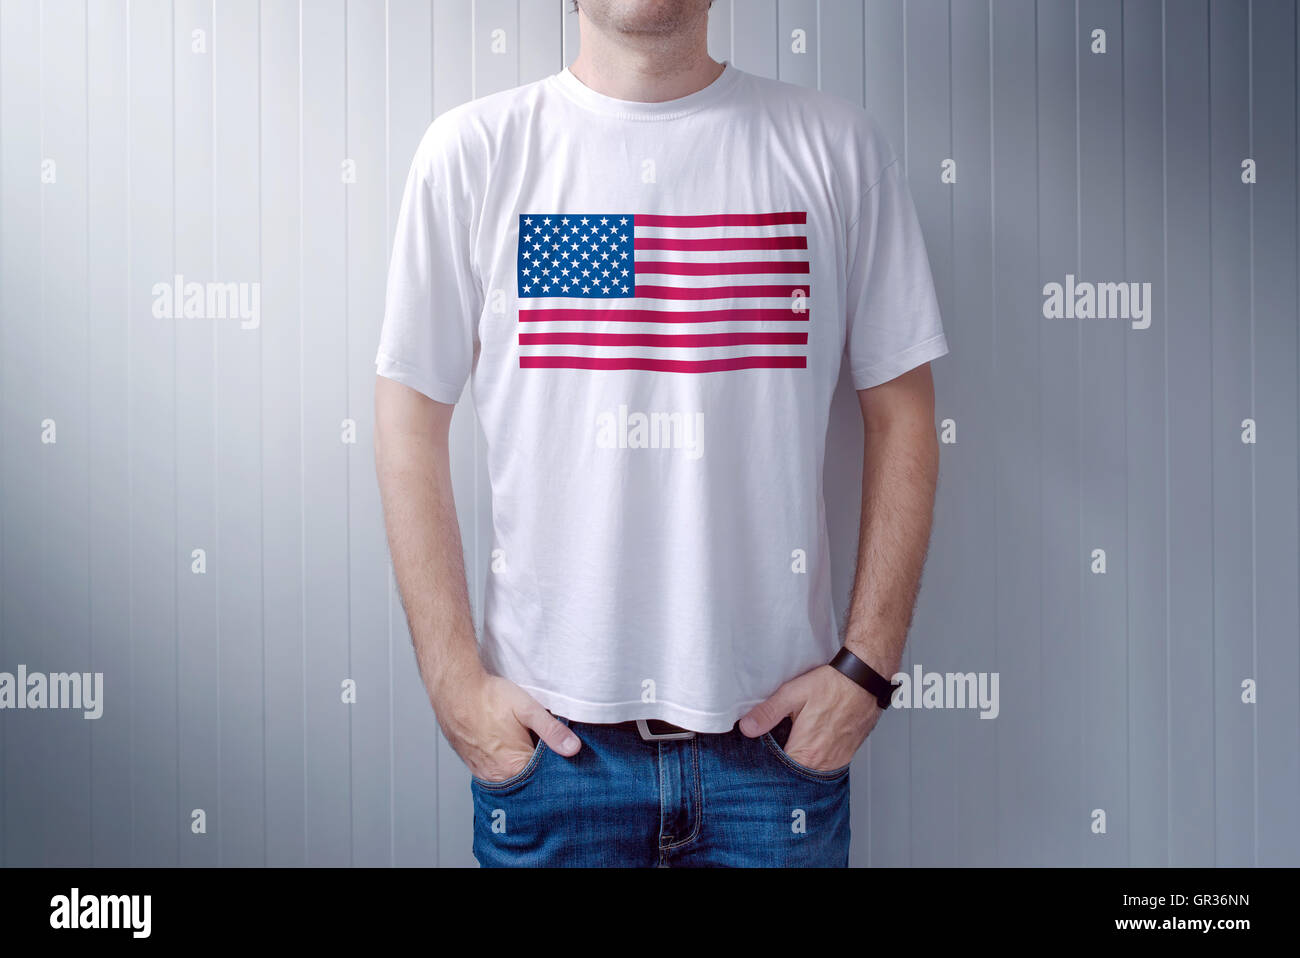 American patriot wearing white shirt with USA flag print, adult male person supporting United States of America Stock Photo